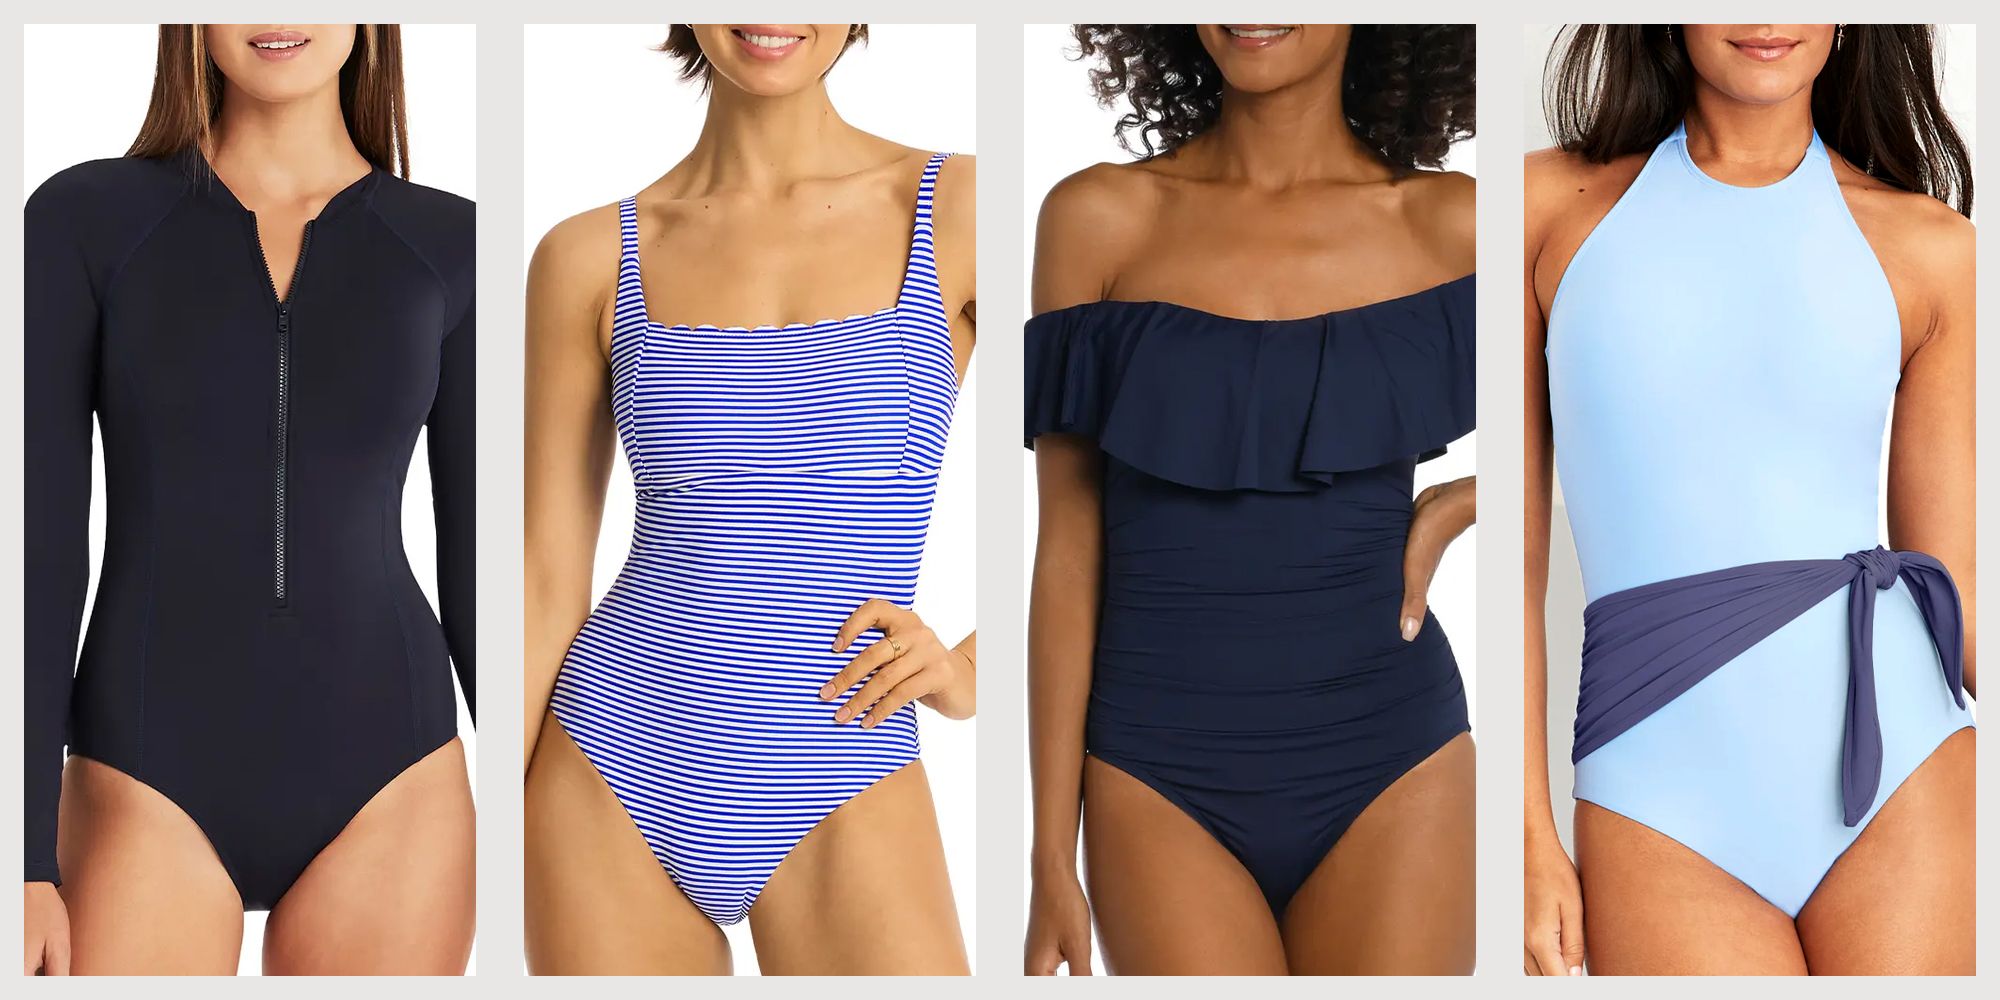 17 Chic One-Piece Swimsuits to Pack for Your Next Beach Vacation